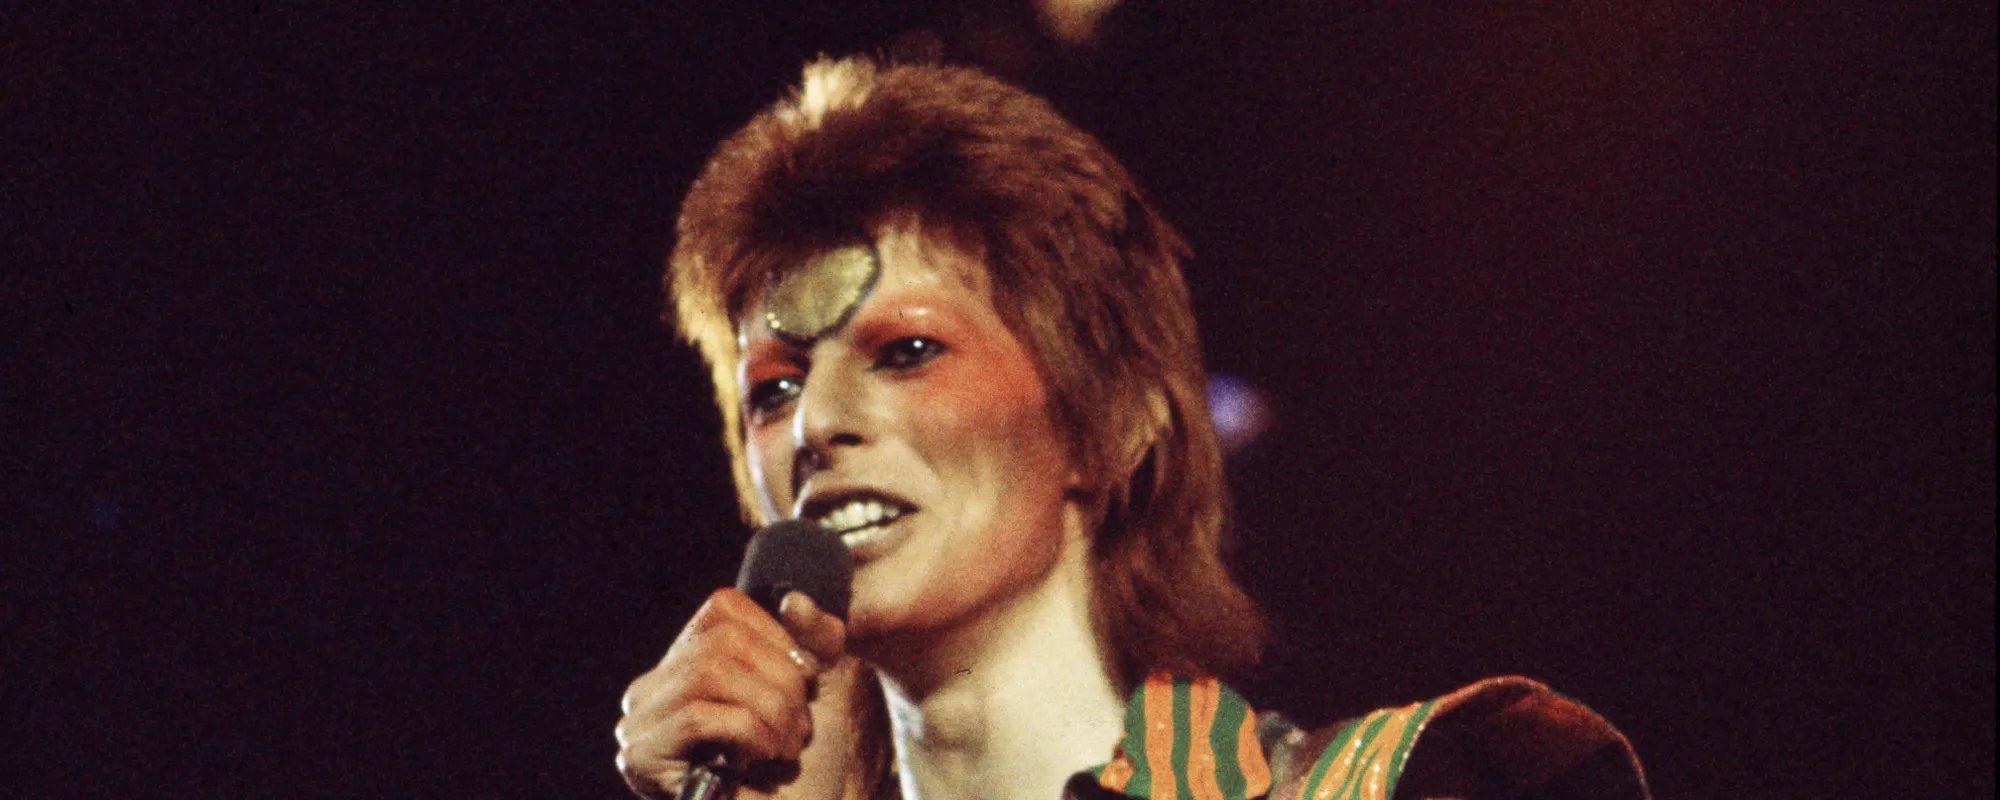 Behind the Strange Album Cover for David Bowie’s ‘The Rise and Fall of Ziggy Stardust and the Spiders from Mars’